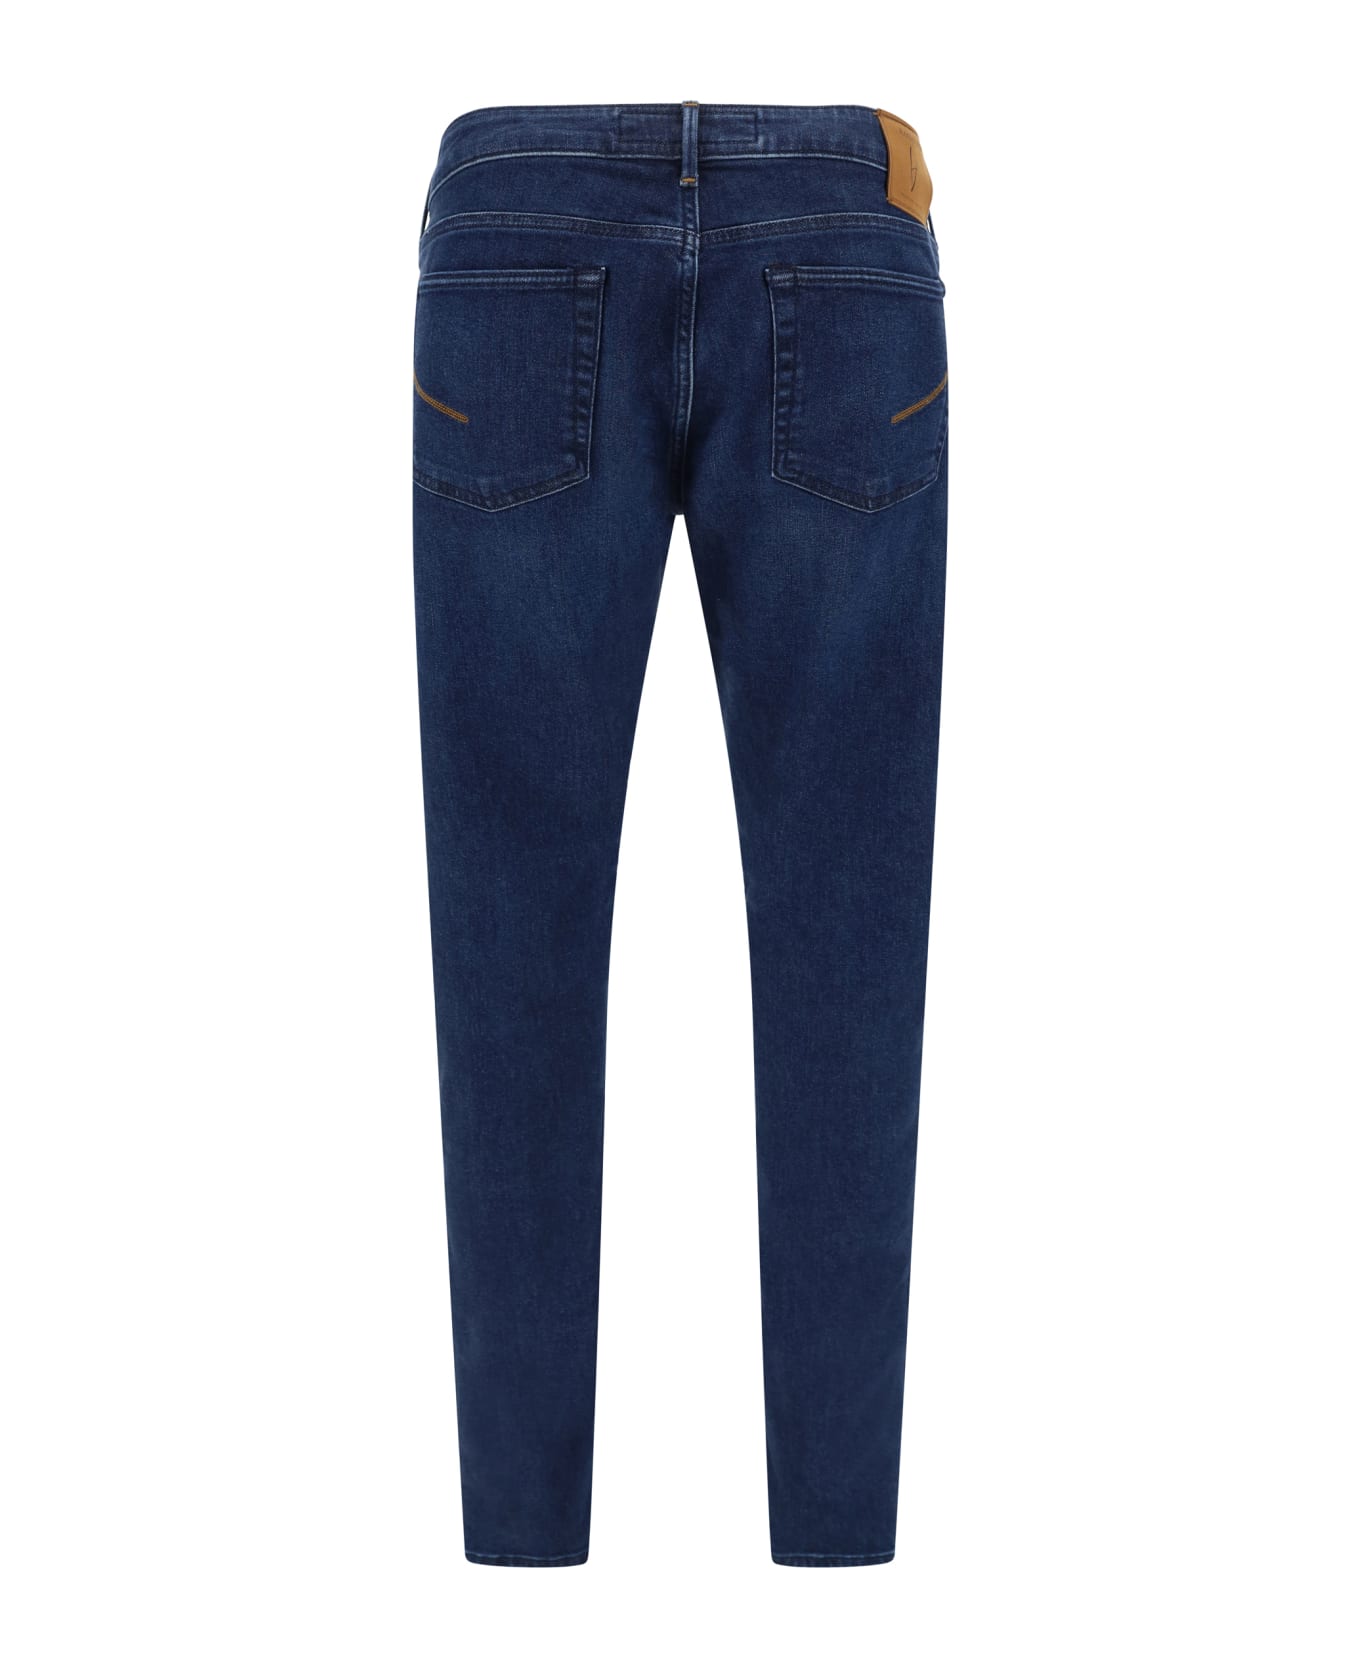 Hand Picked Jeans - Lav.1